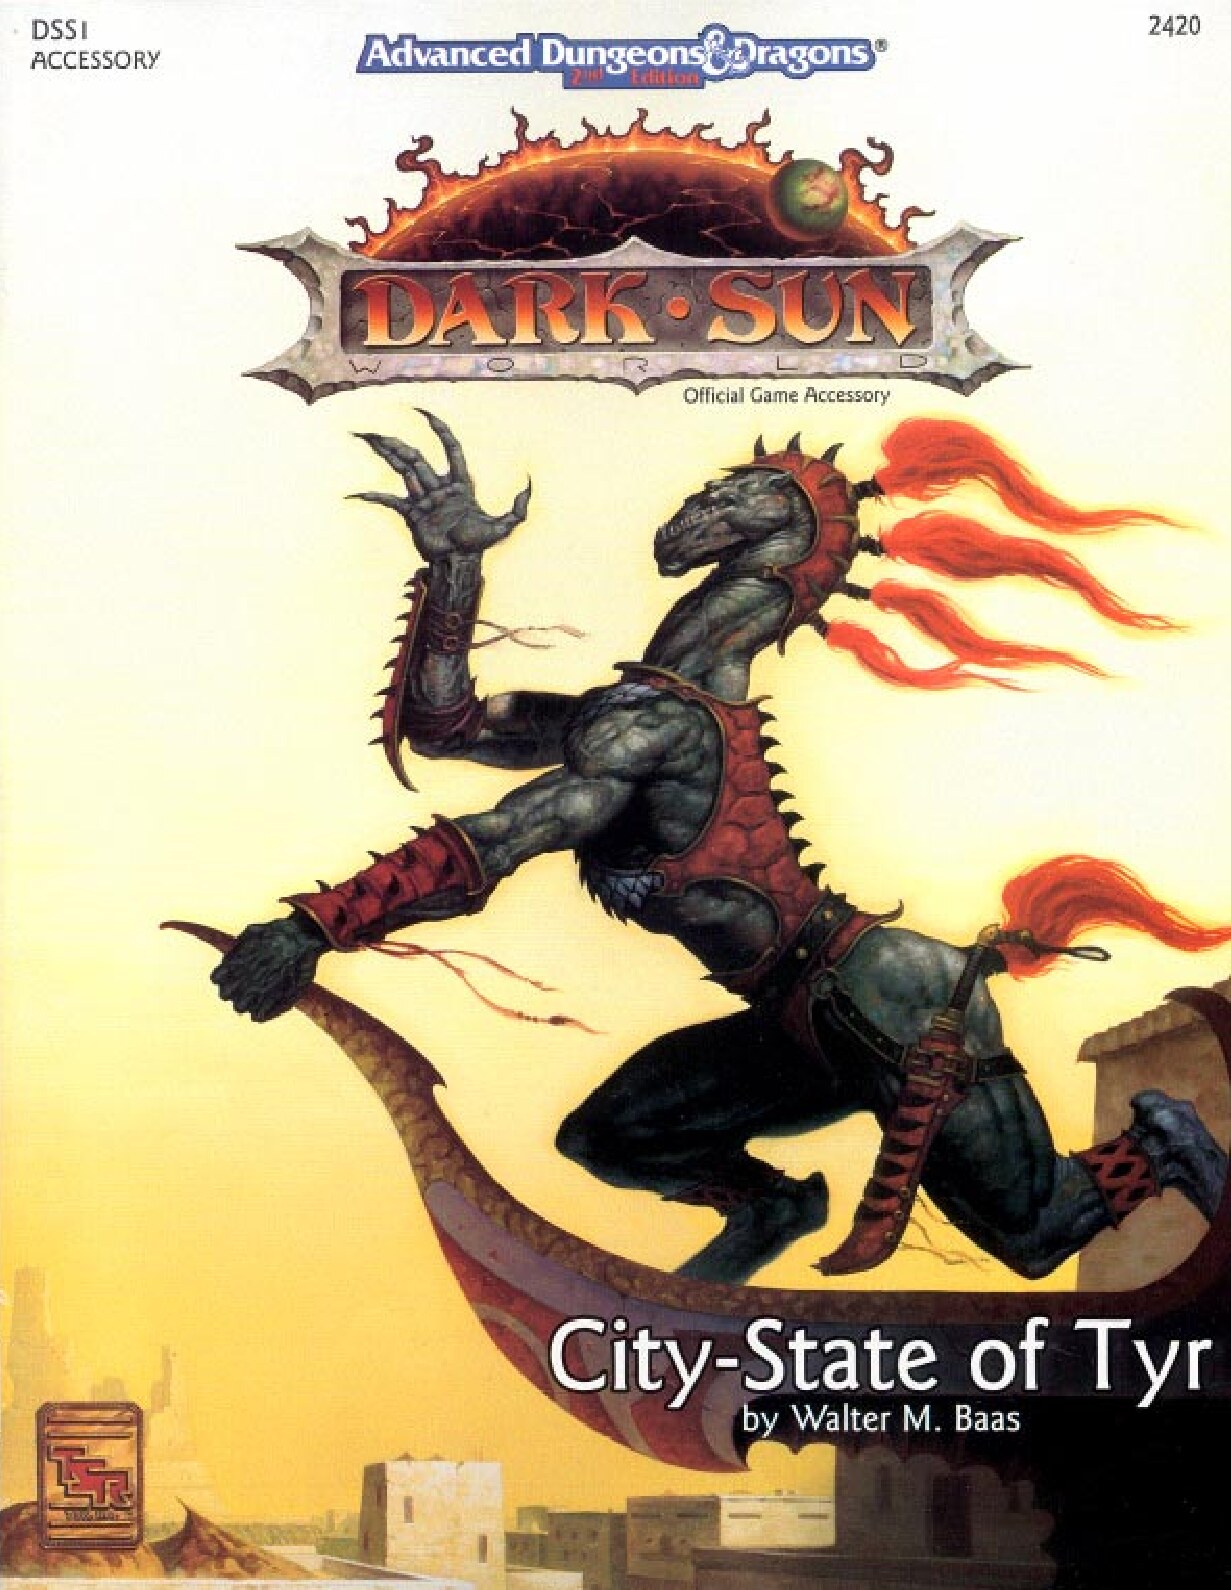 City-State of Tyr